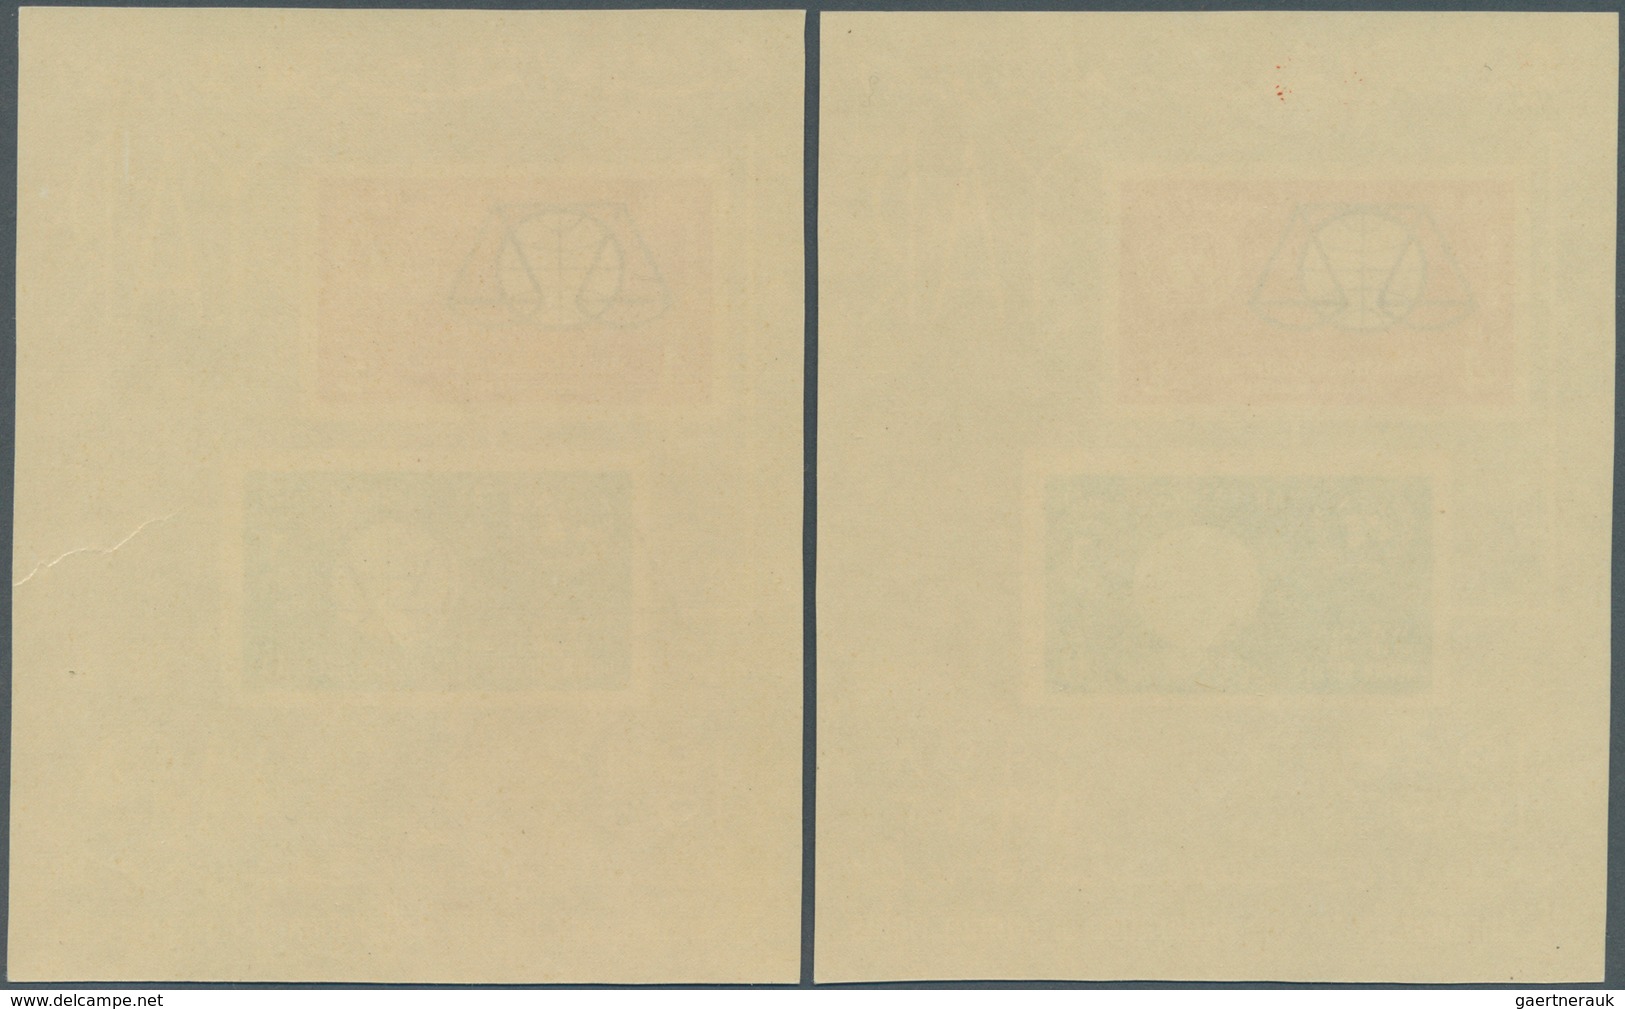 Jemen: 1963, 15th Anniversary of Declaration of Human Rights, group of seven souvenir sheets showing